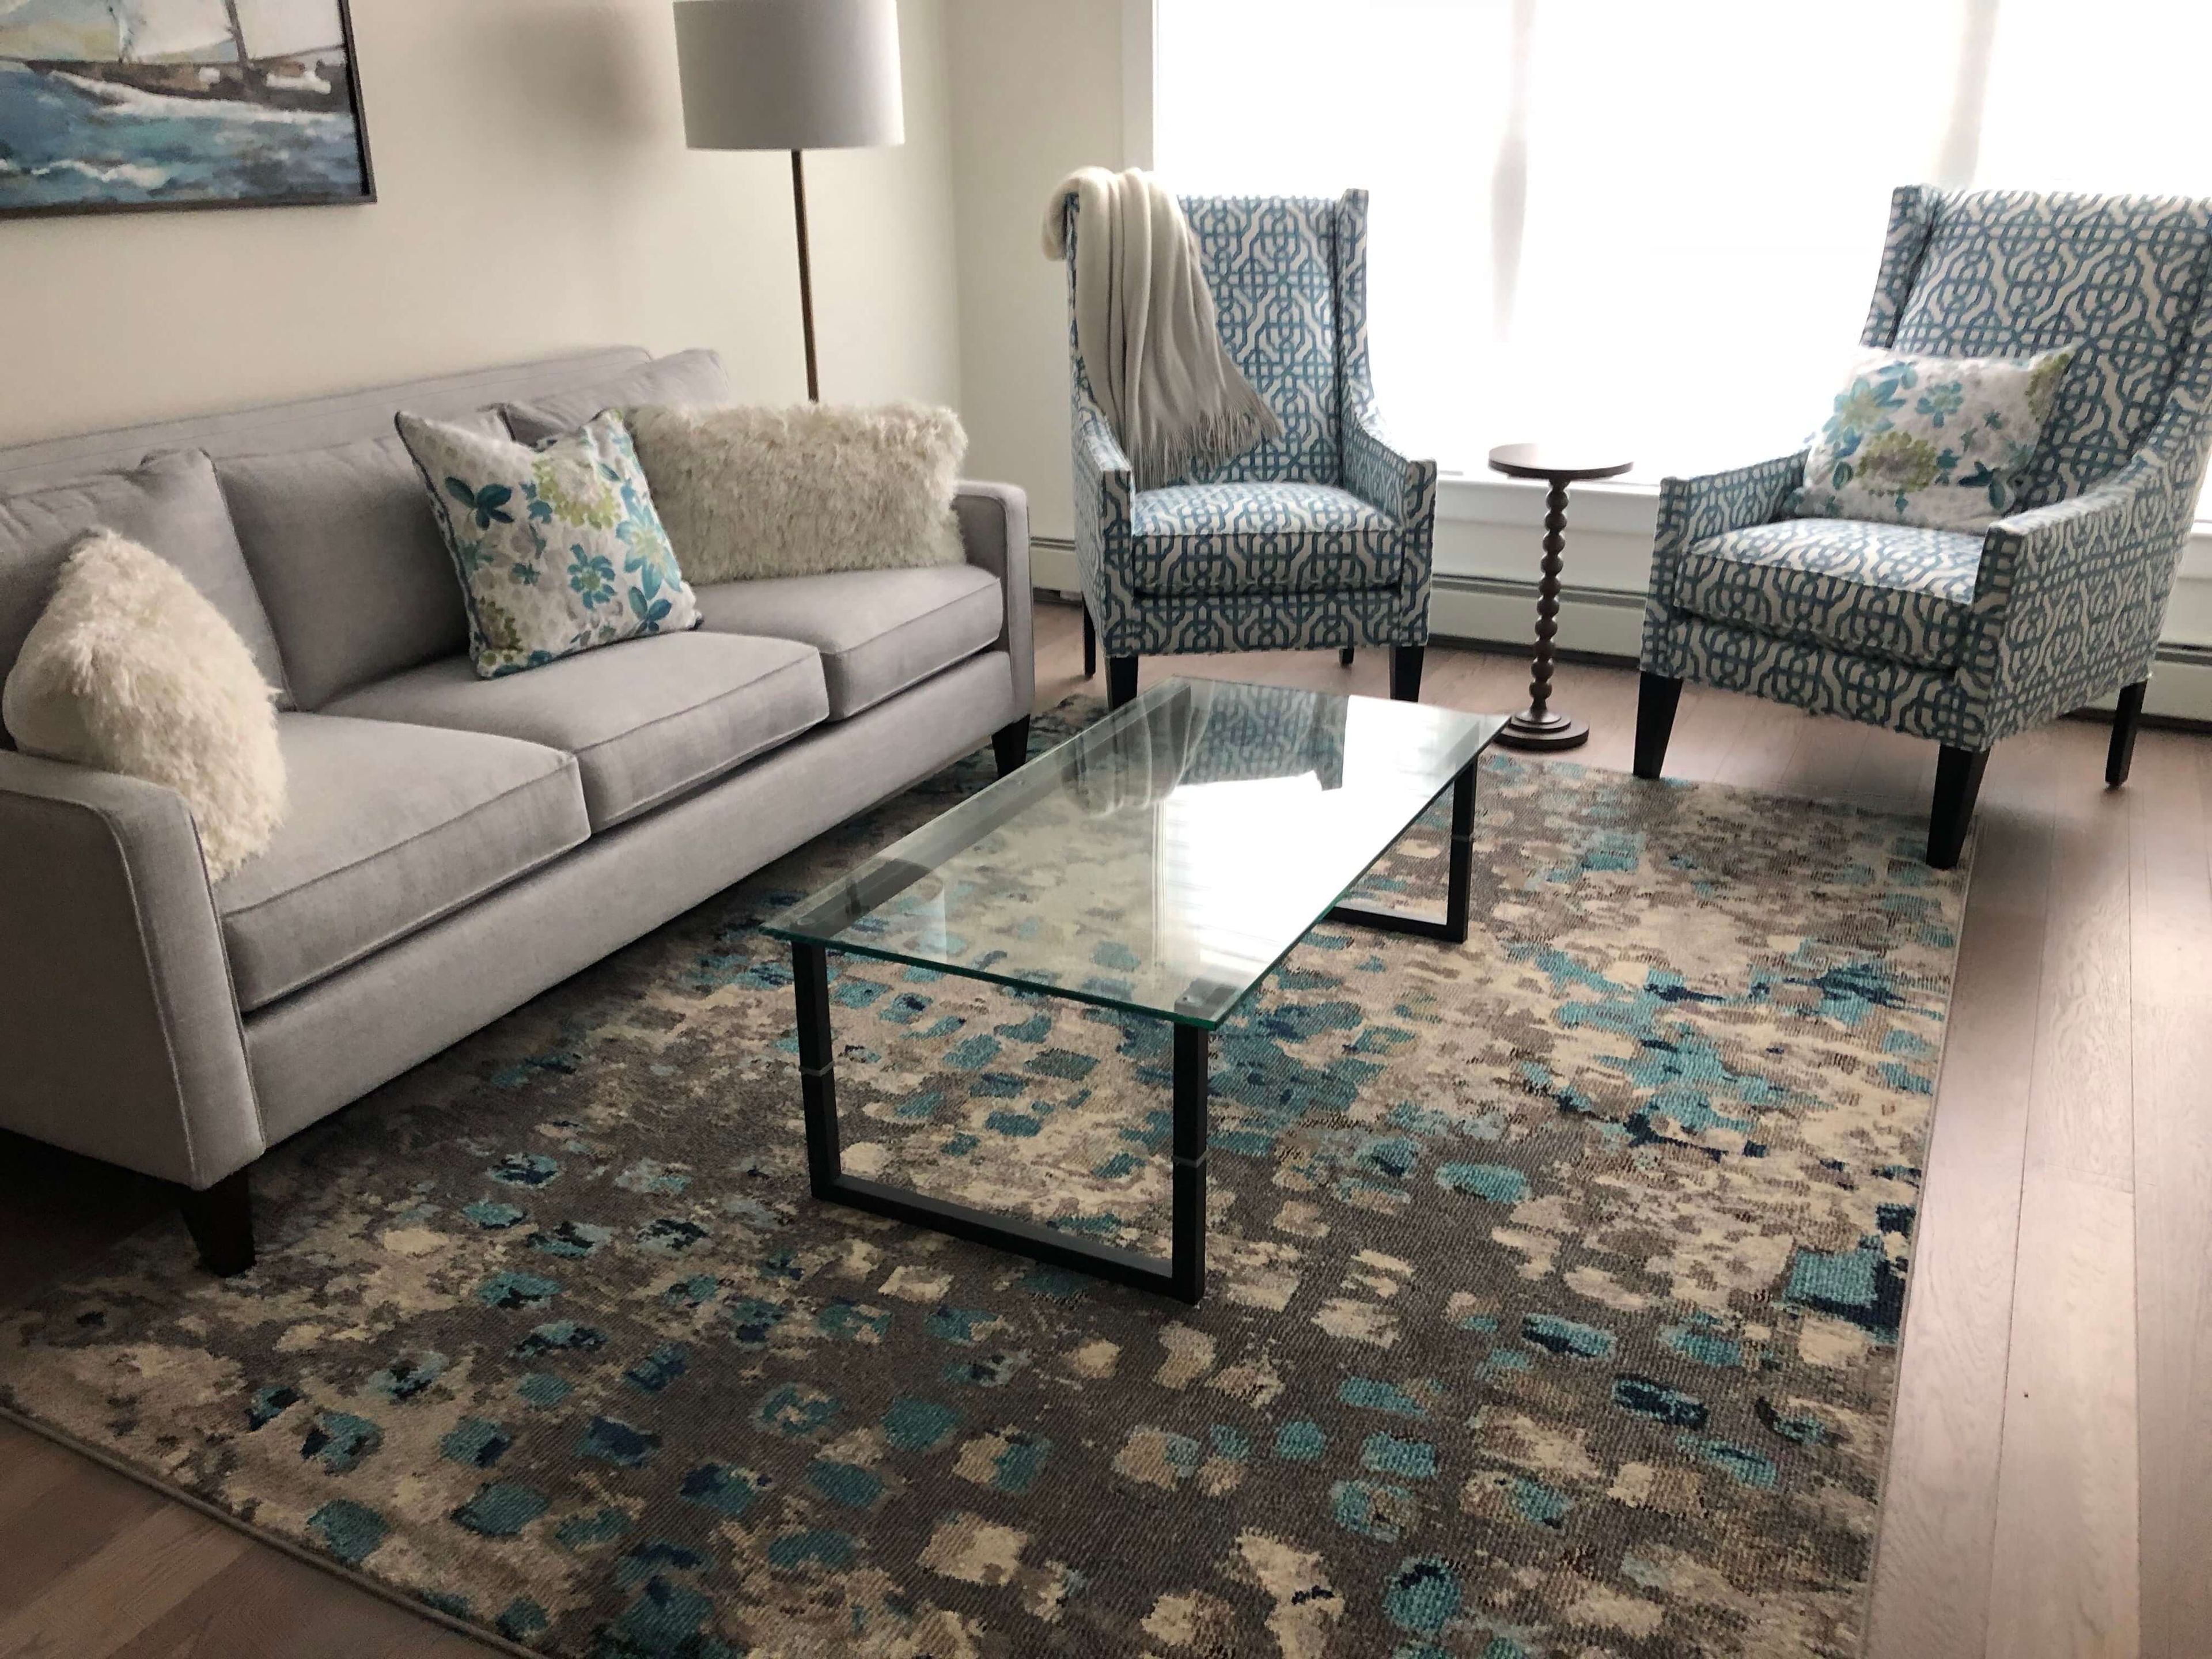 Senior living community Lasell Village featuring stylish furniture, home decor, and a cozy living area.